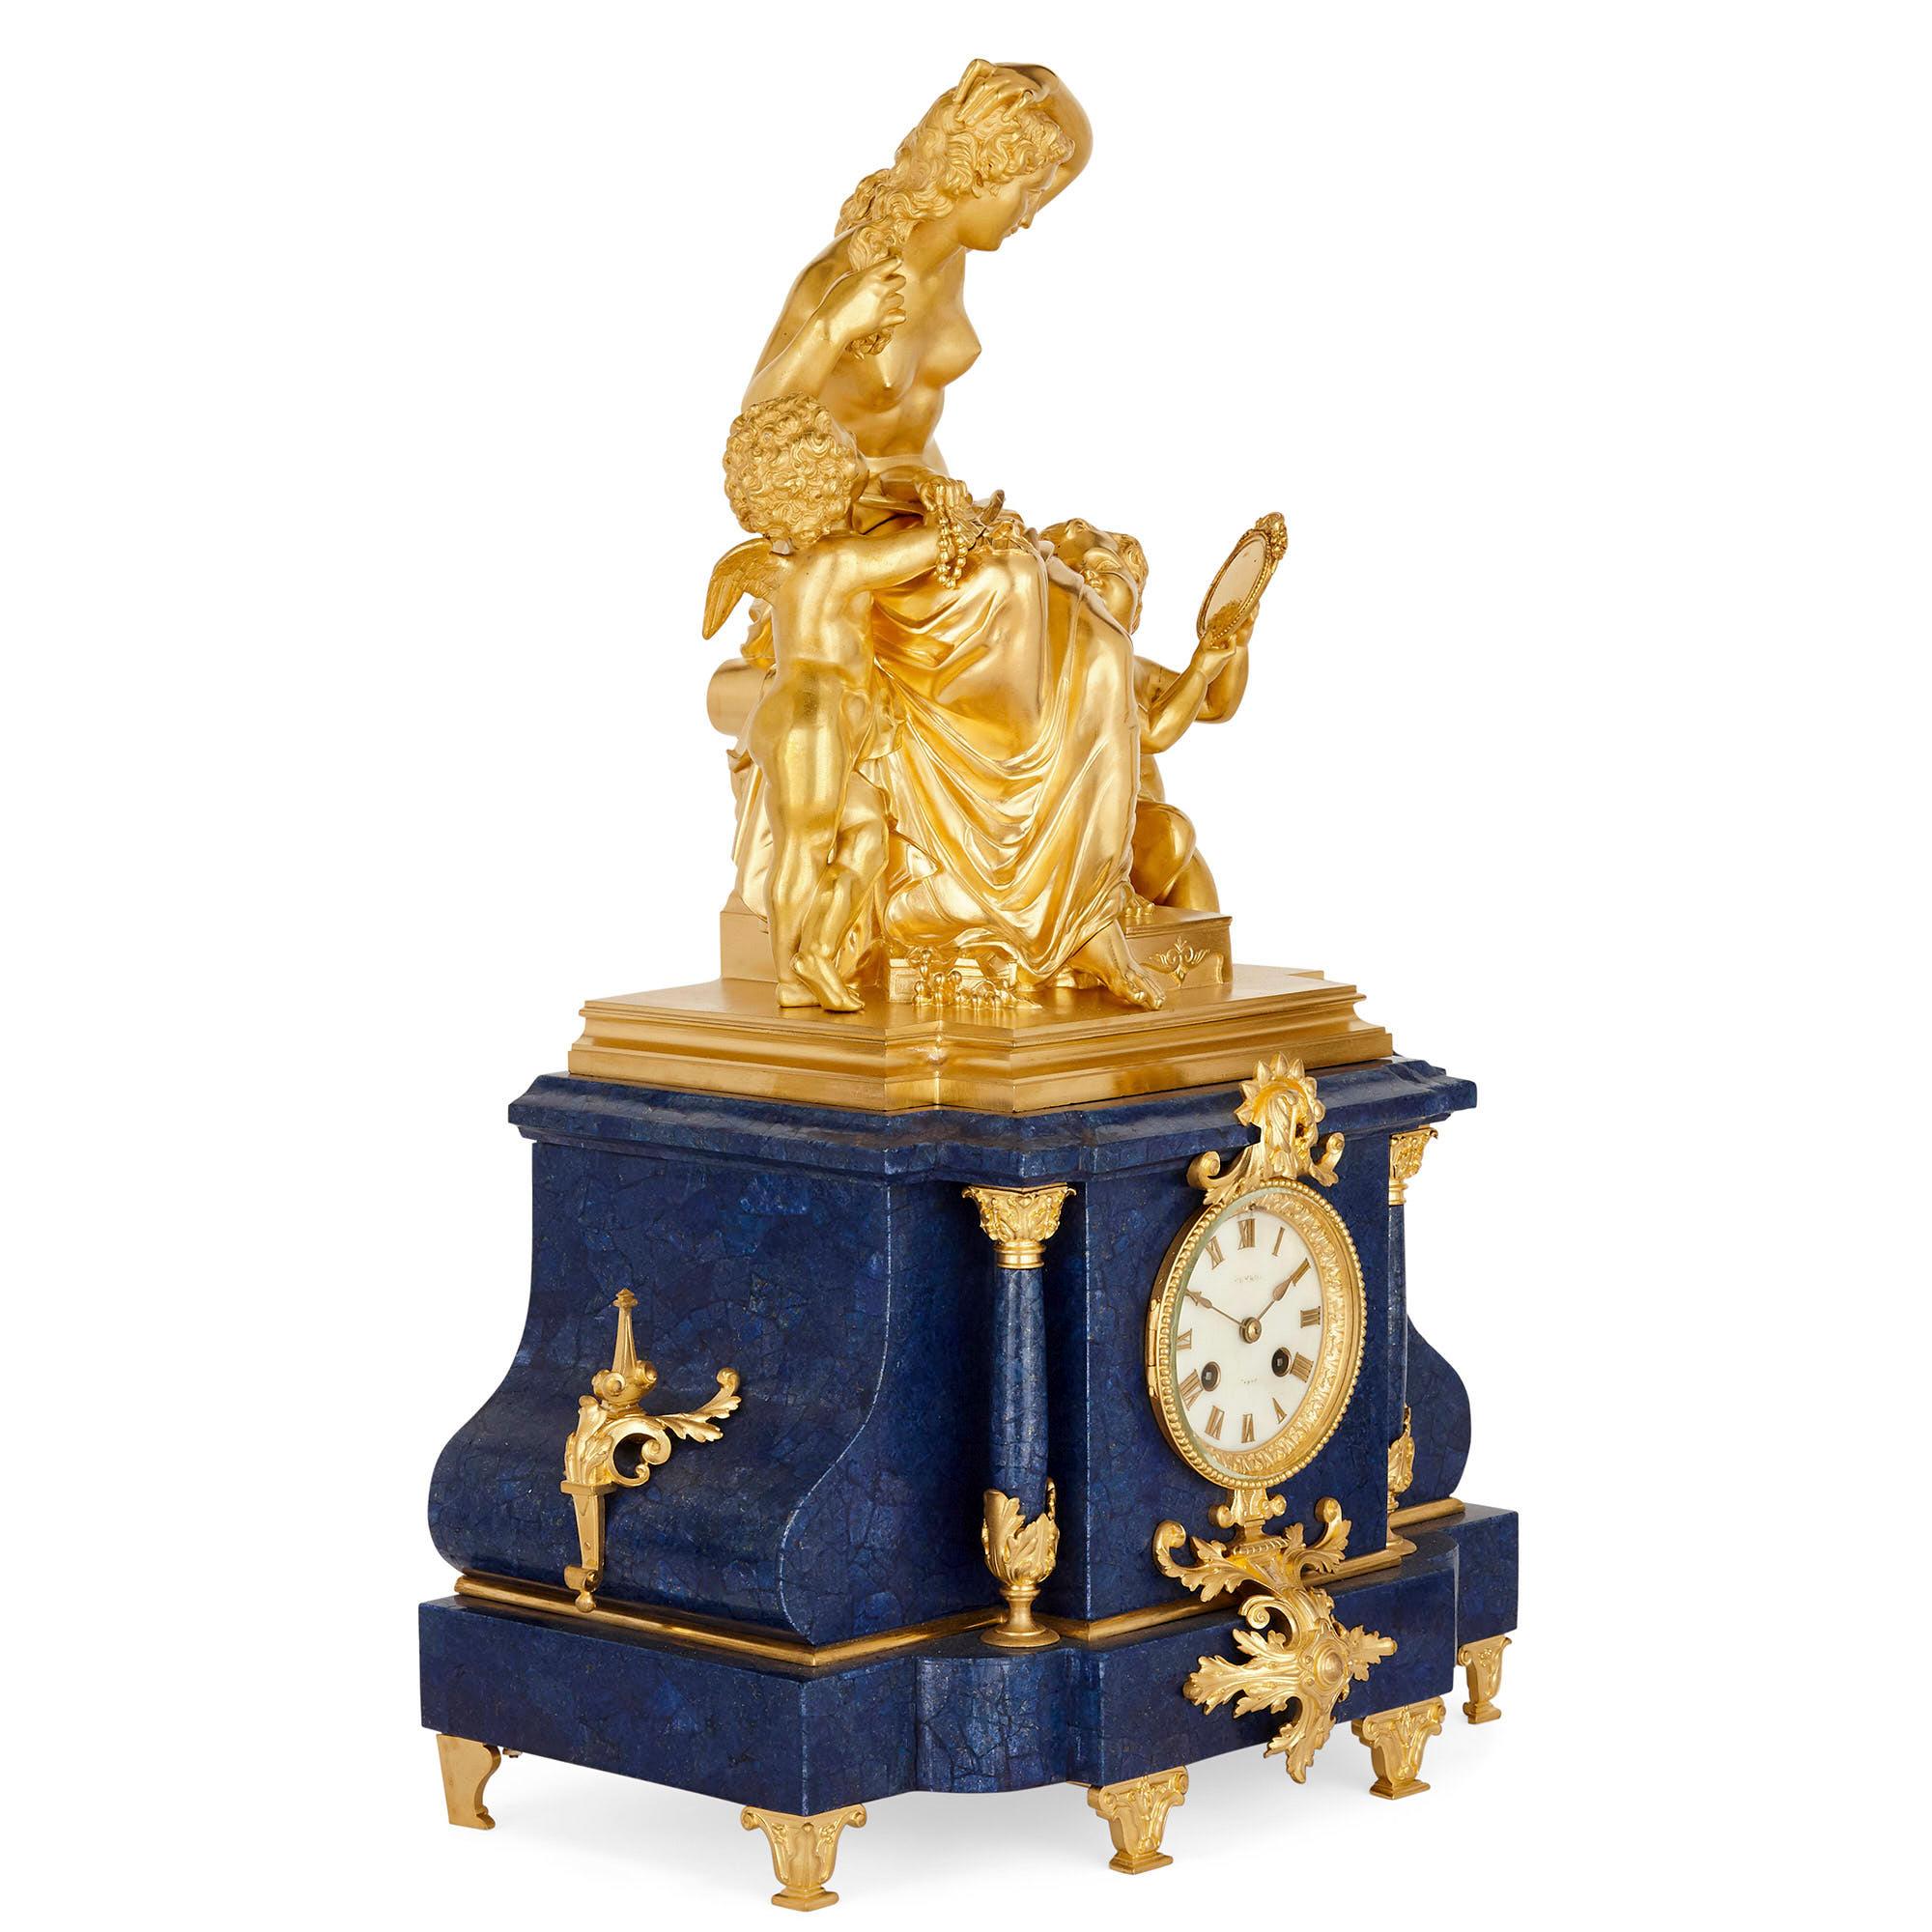 This set three-piece garniture contains a mantel clock and a pair of conforming flanking vases. The set is wrought from gilt bronze, painted porcelain, and lapis lazuli—the lapis a later addition.

The central mantel clock is strikingly designed: